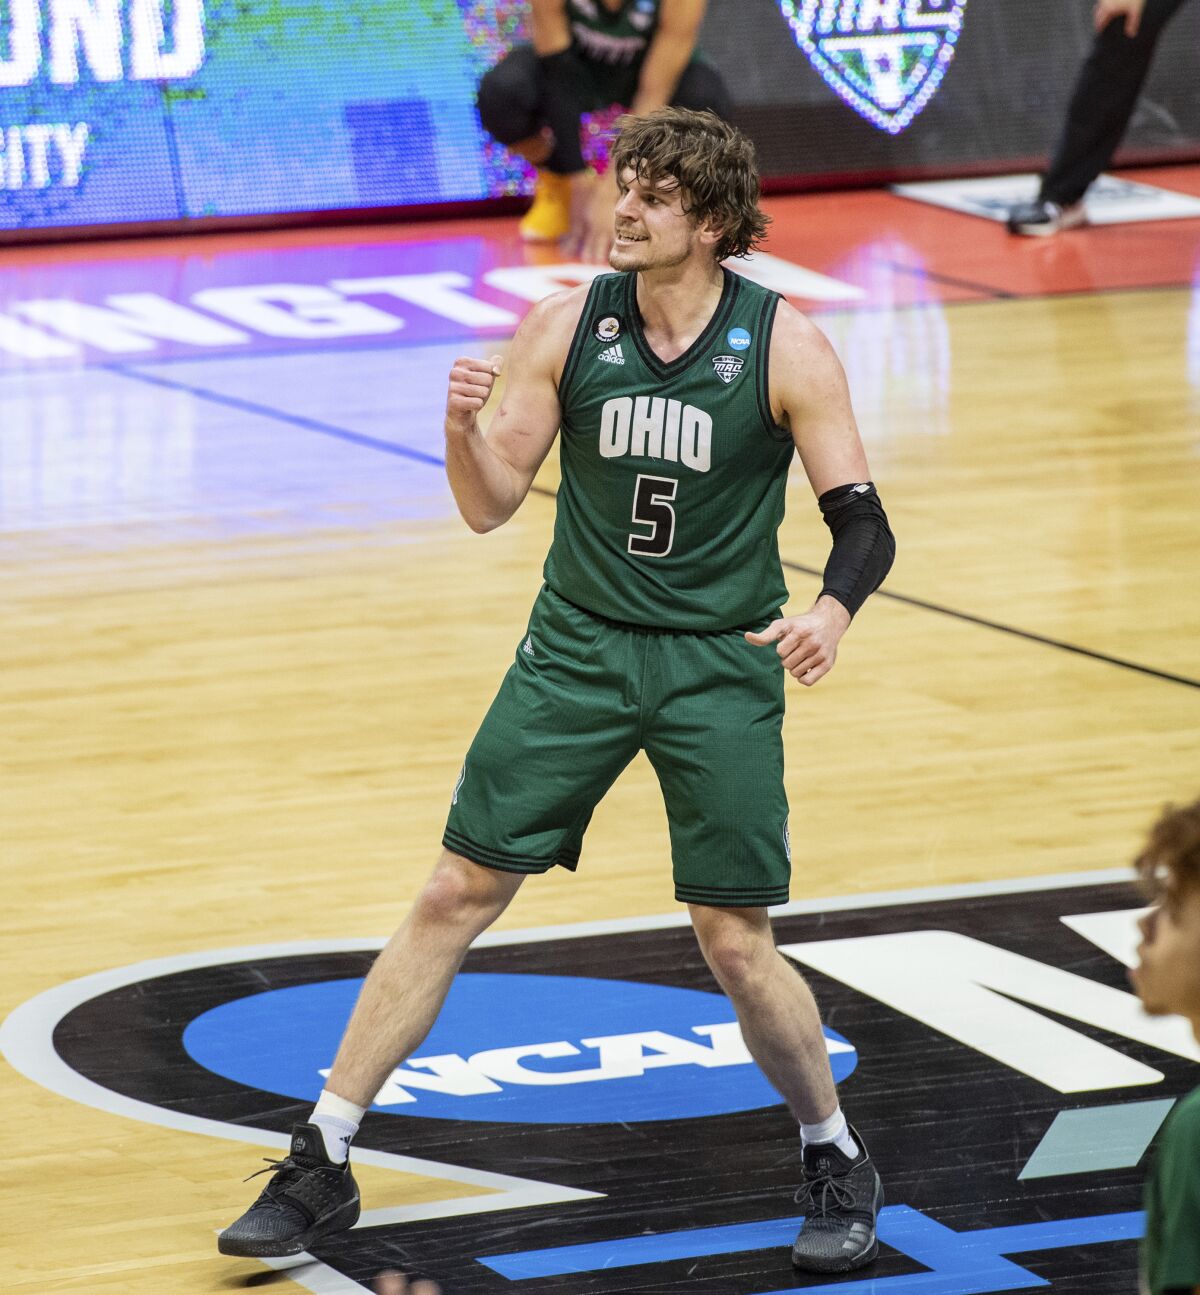 Ohio forward Ben Vander Plas celebrates after making a three-pointer during the first half against Virginia on Saturday.